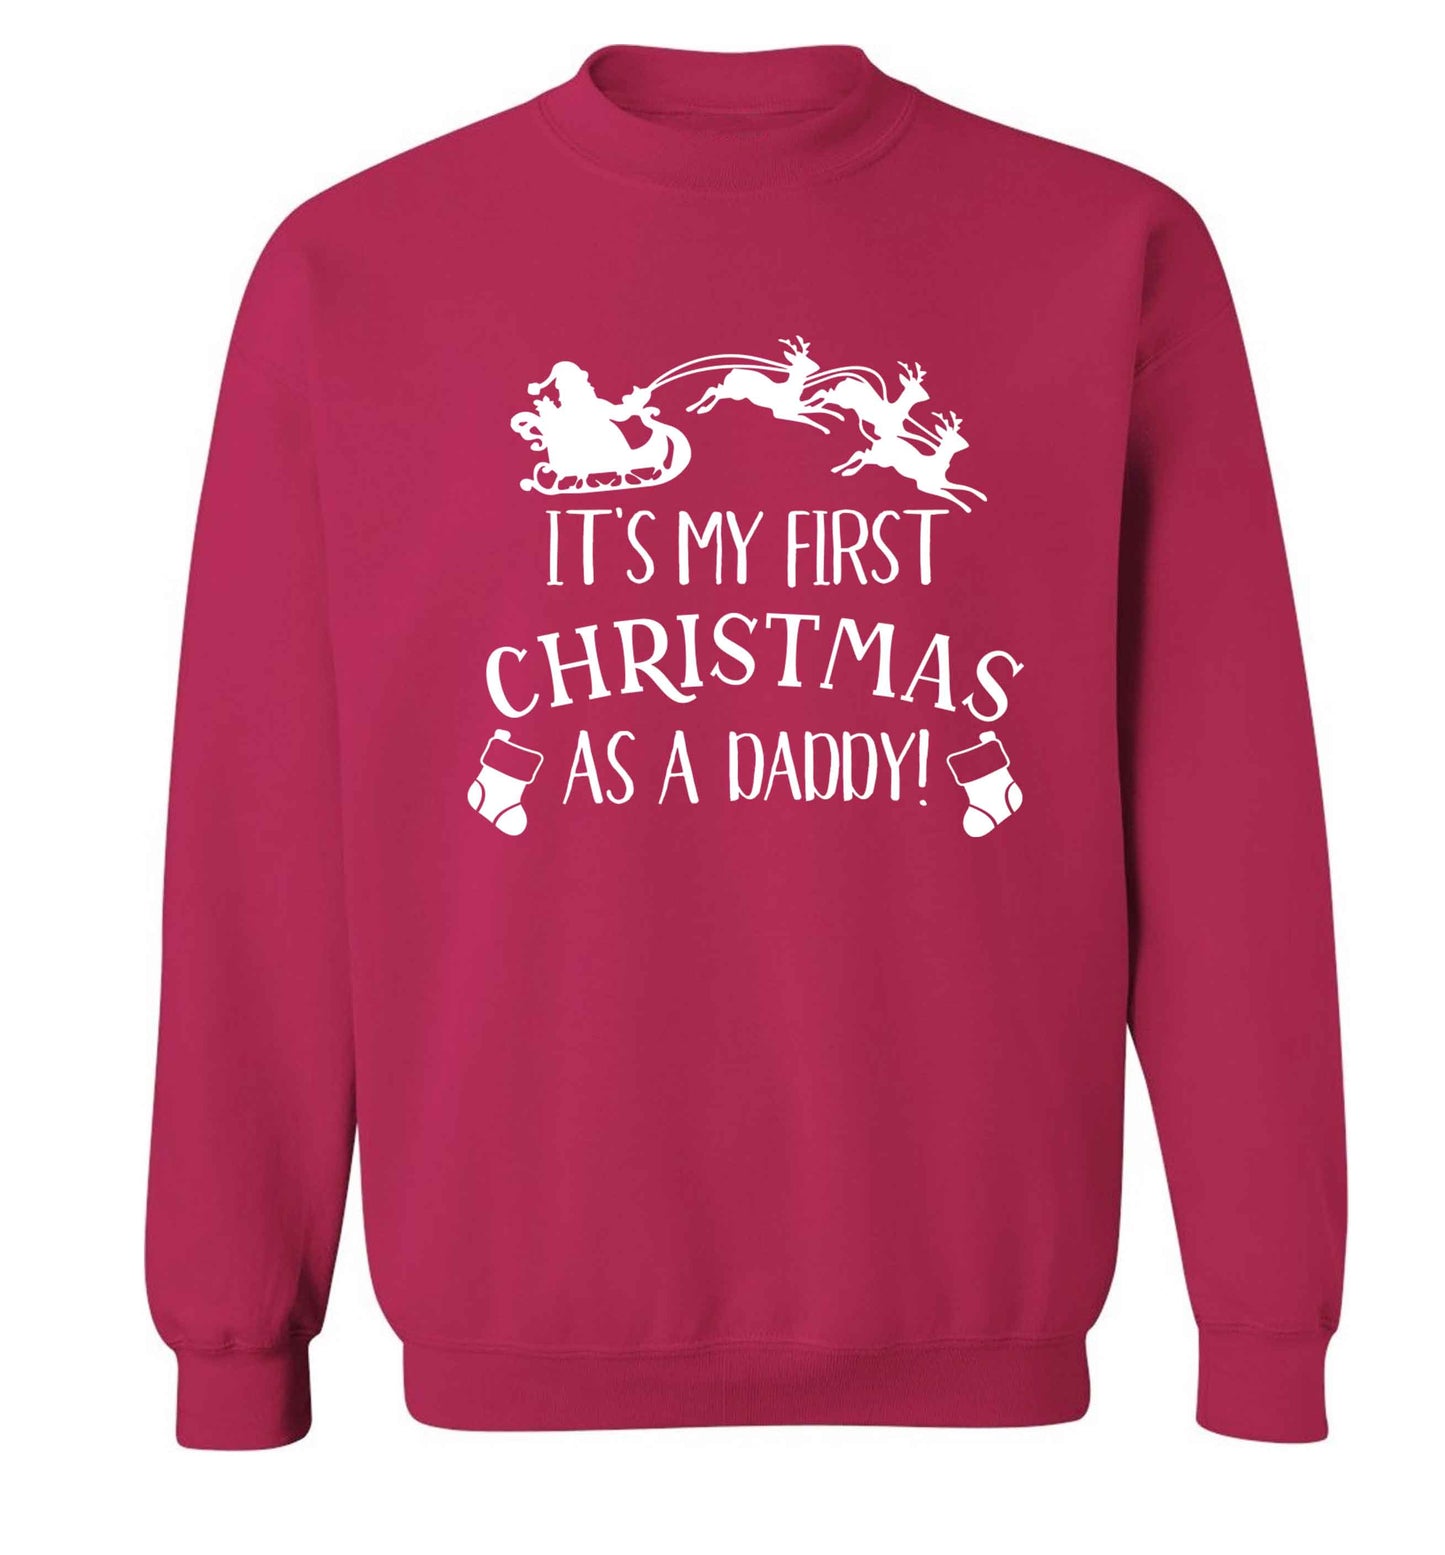 It's my first Christmas as a daddy Adult's unisex pink Sweater 2XL